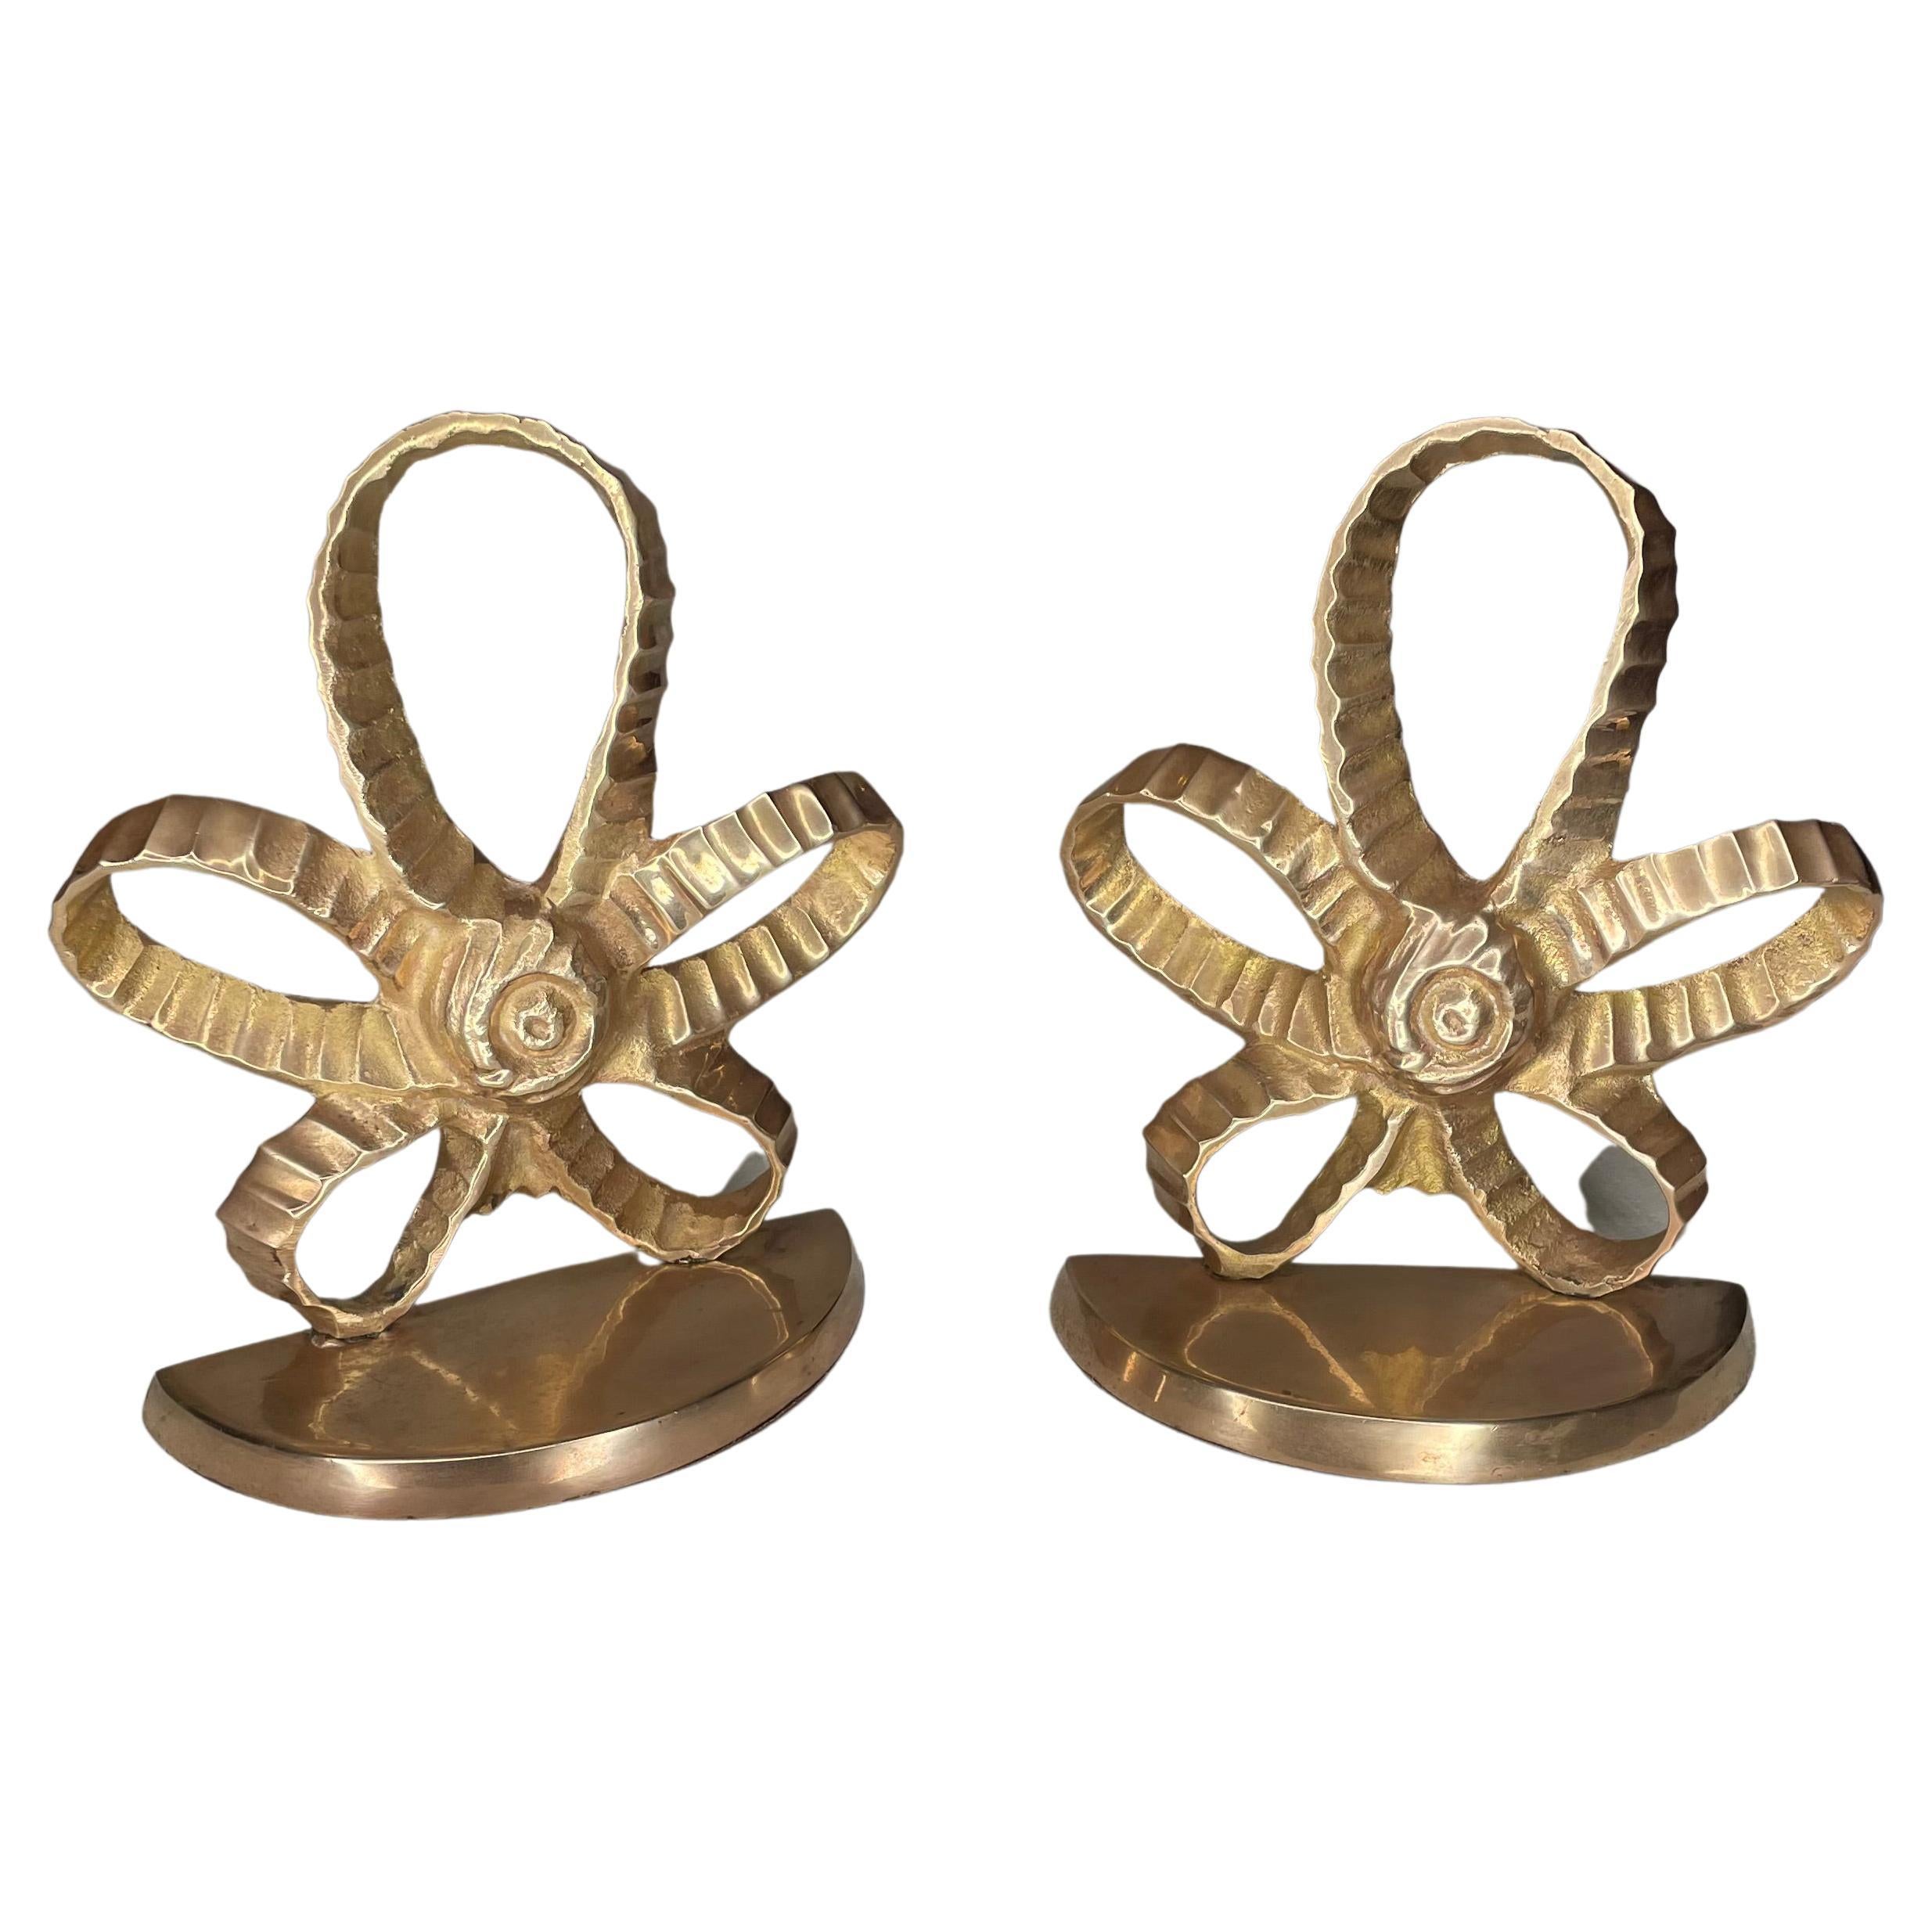 1960s Polished Brass Star Bookends, a Pair